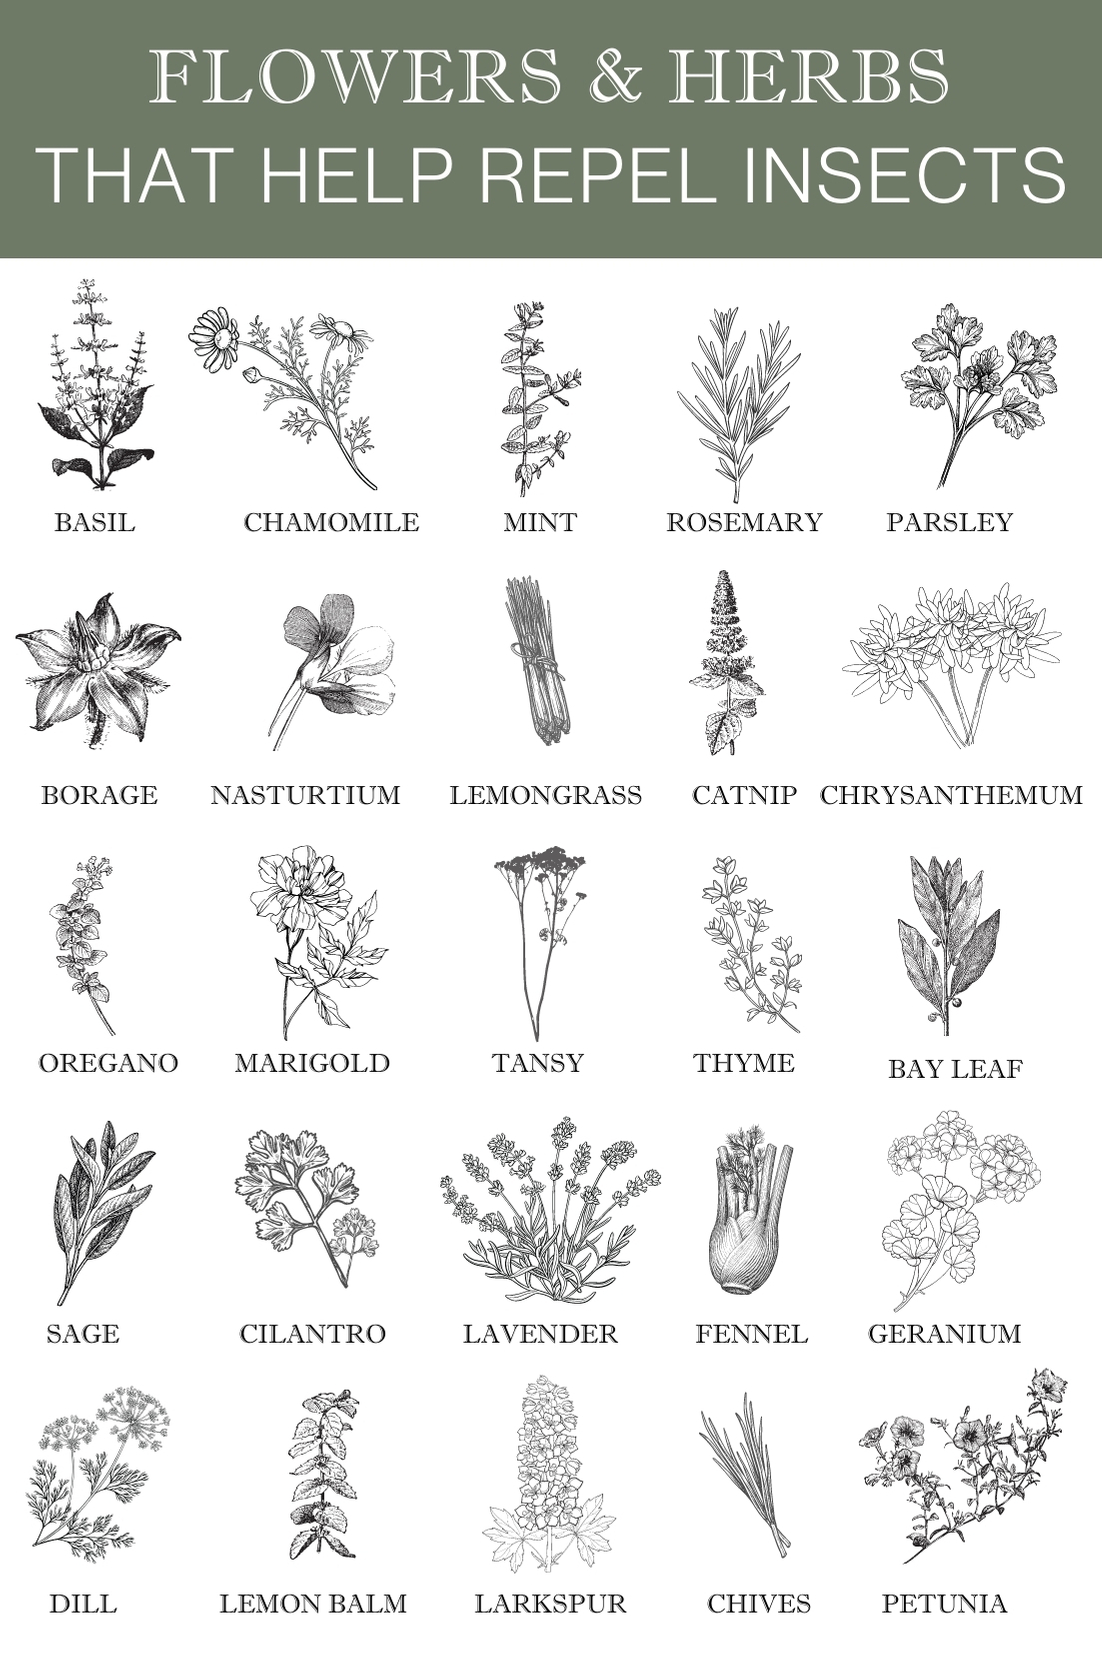 Companion Planting : Flowers & Herbs that help repel bugs